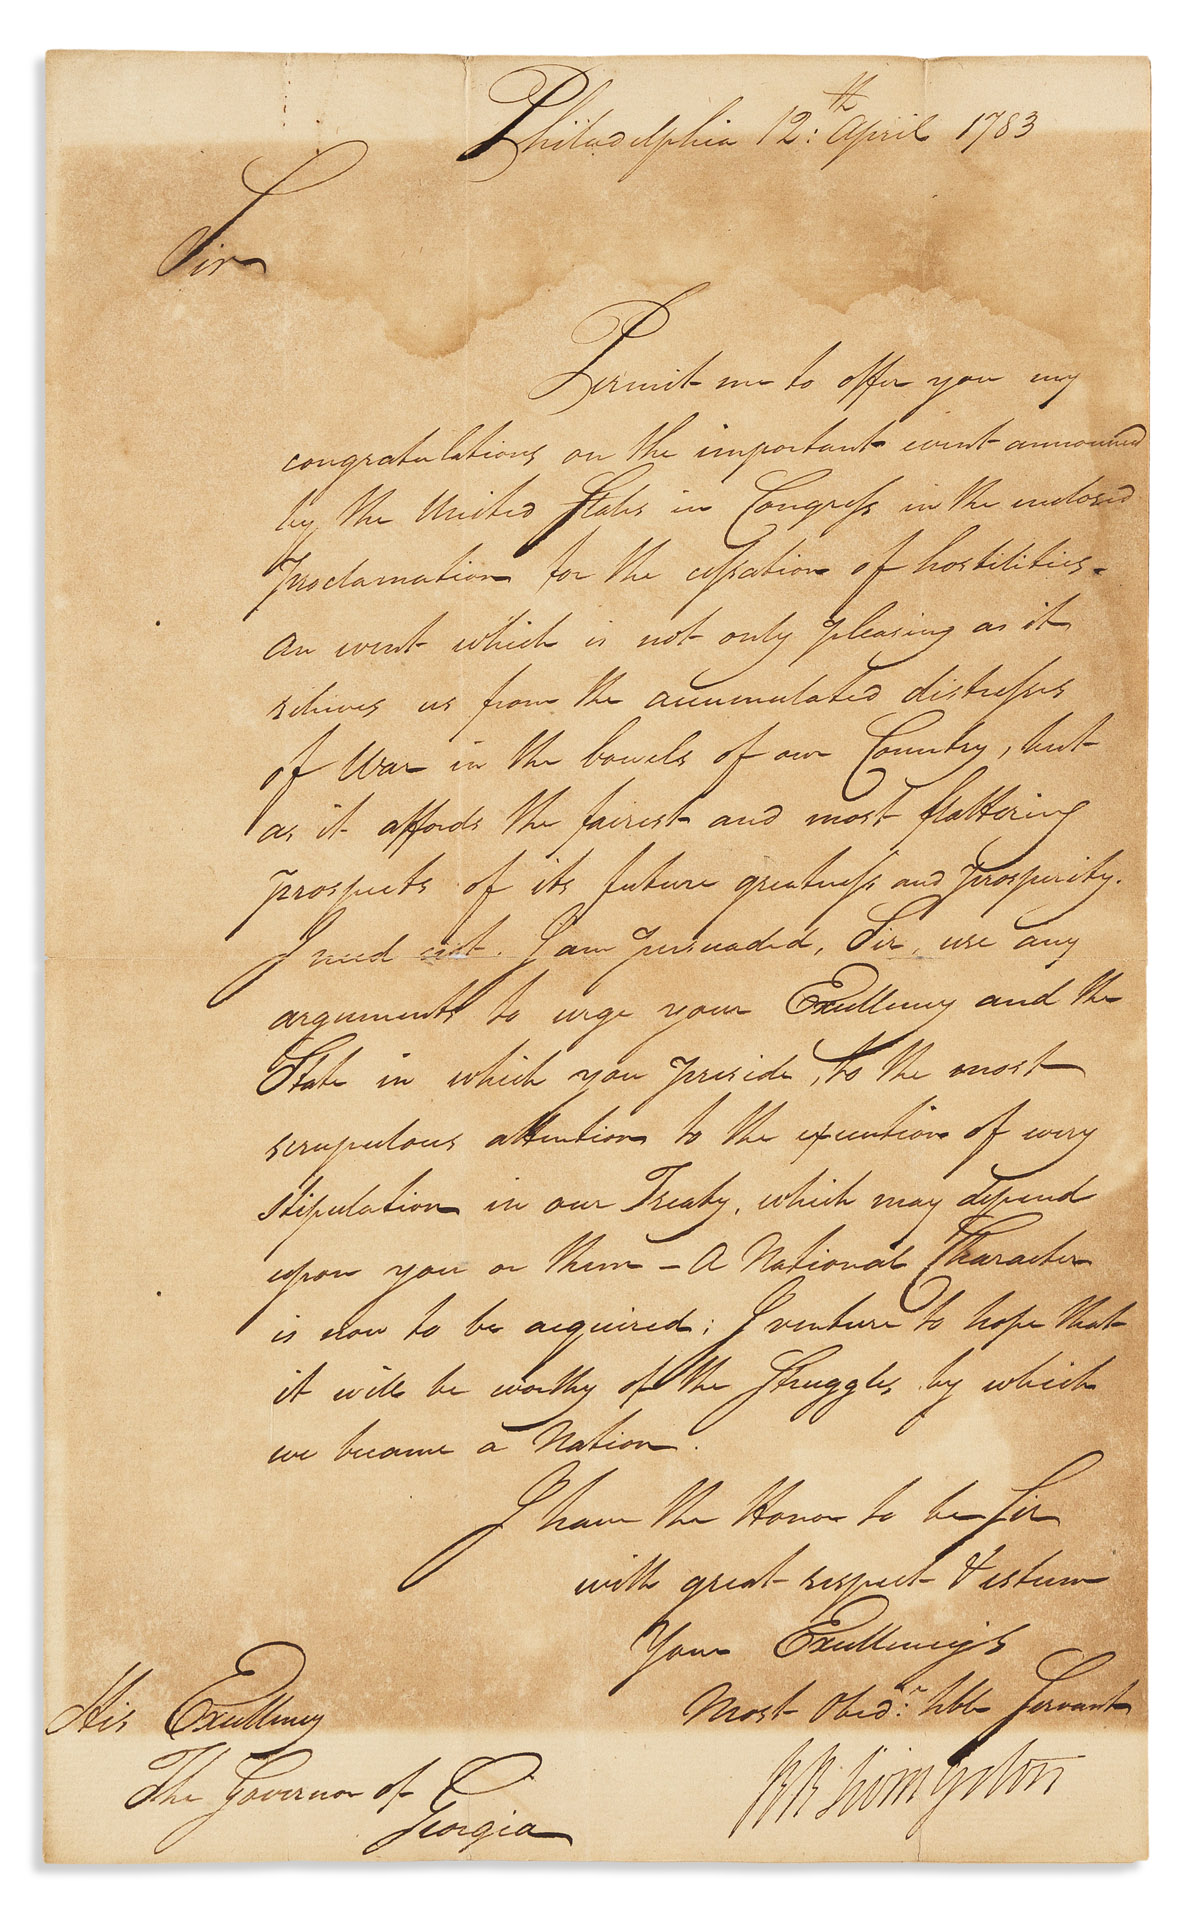 (AMERICAN REVOLUTION--1783.) Robert R. Livingston. Letter announcing the cessation of hostilities with Great Britain.